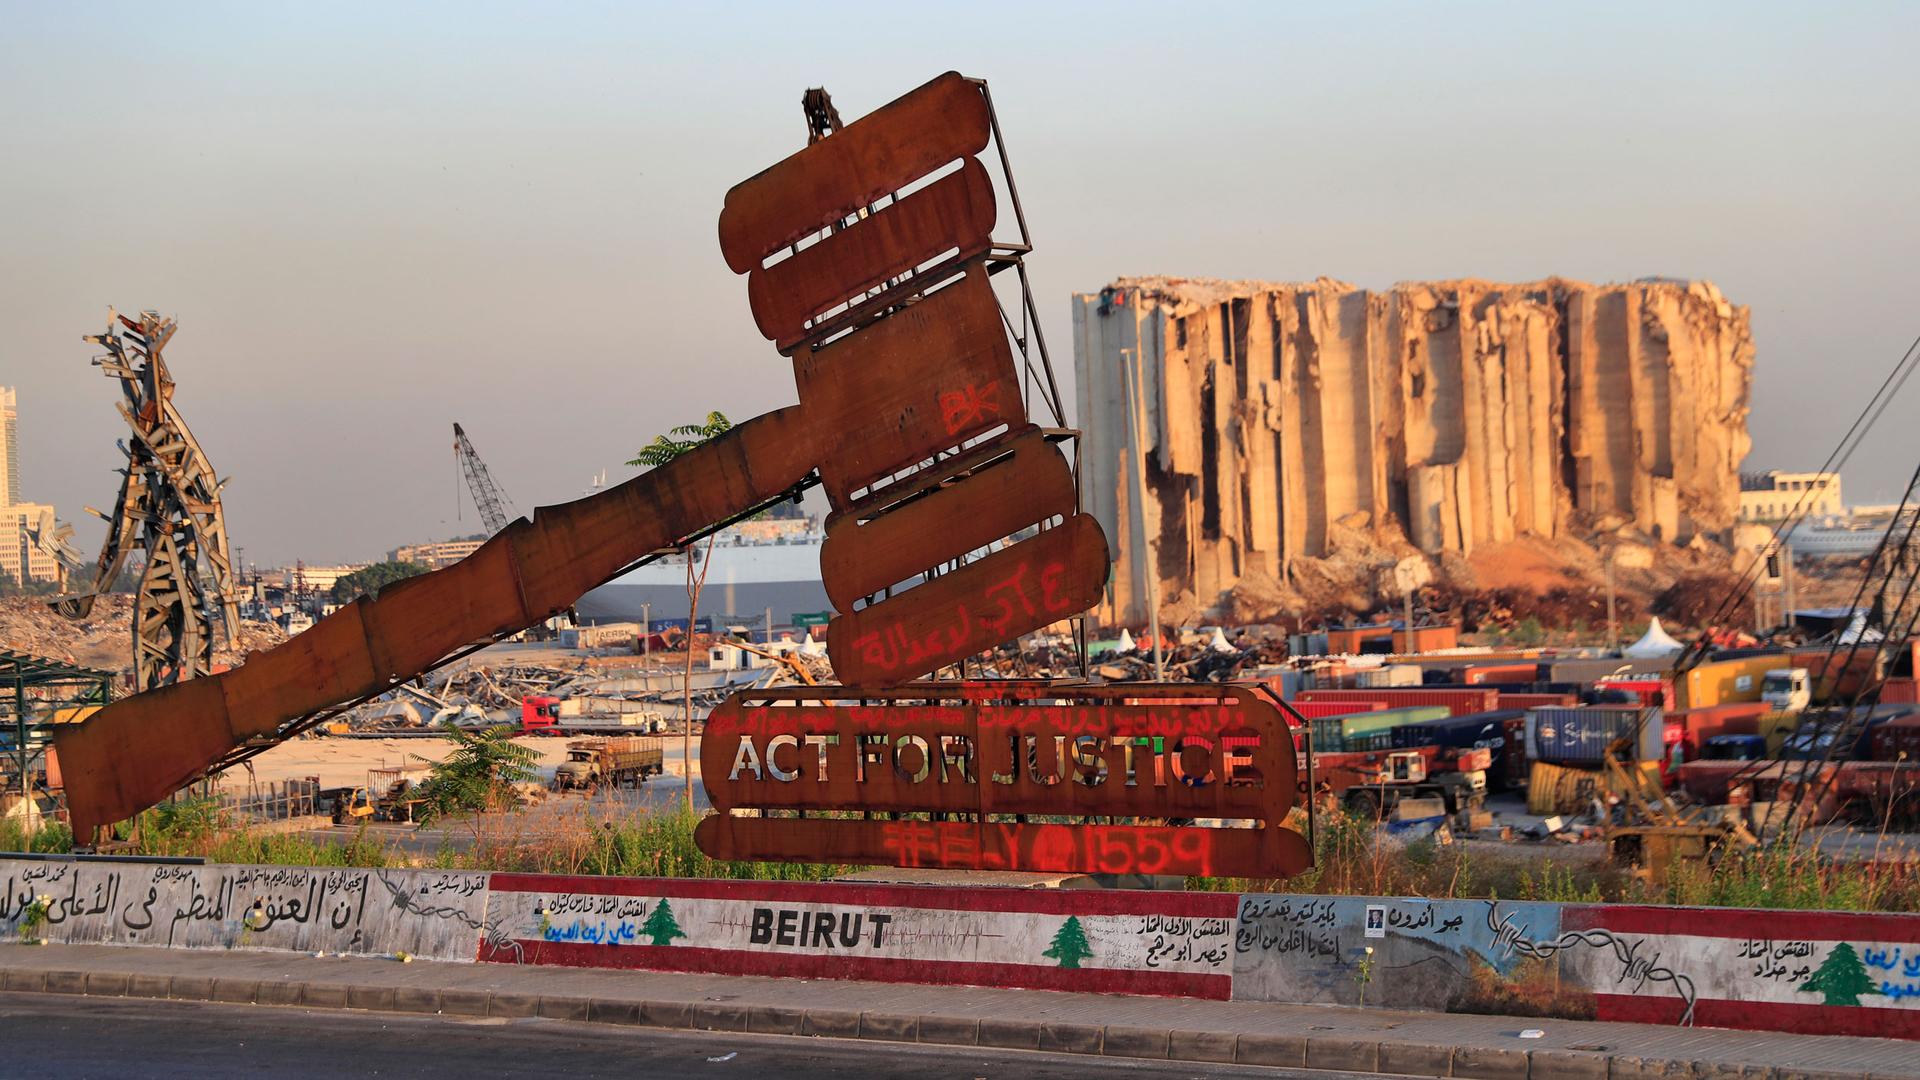 A large gavel made of metal is shown in the near ground hammering a sign that reads "Act for Justice" with a bombed out grain silo in the distance.